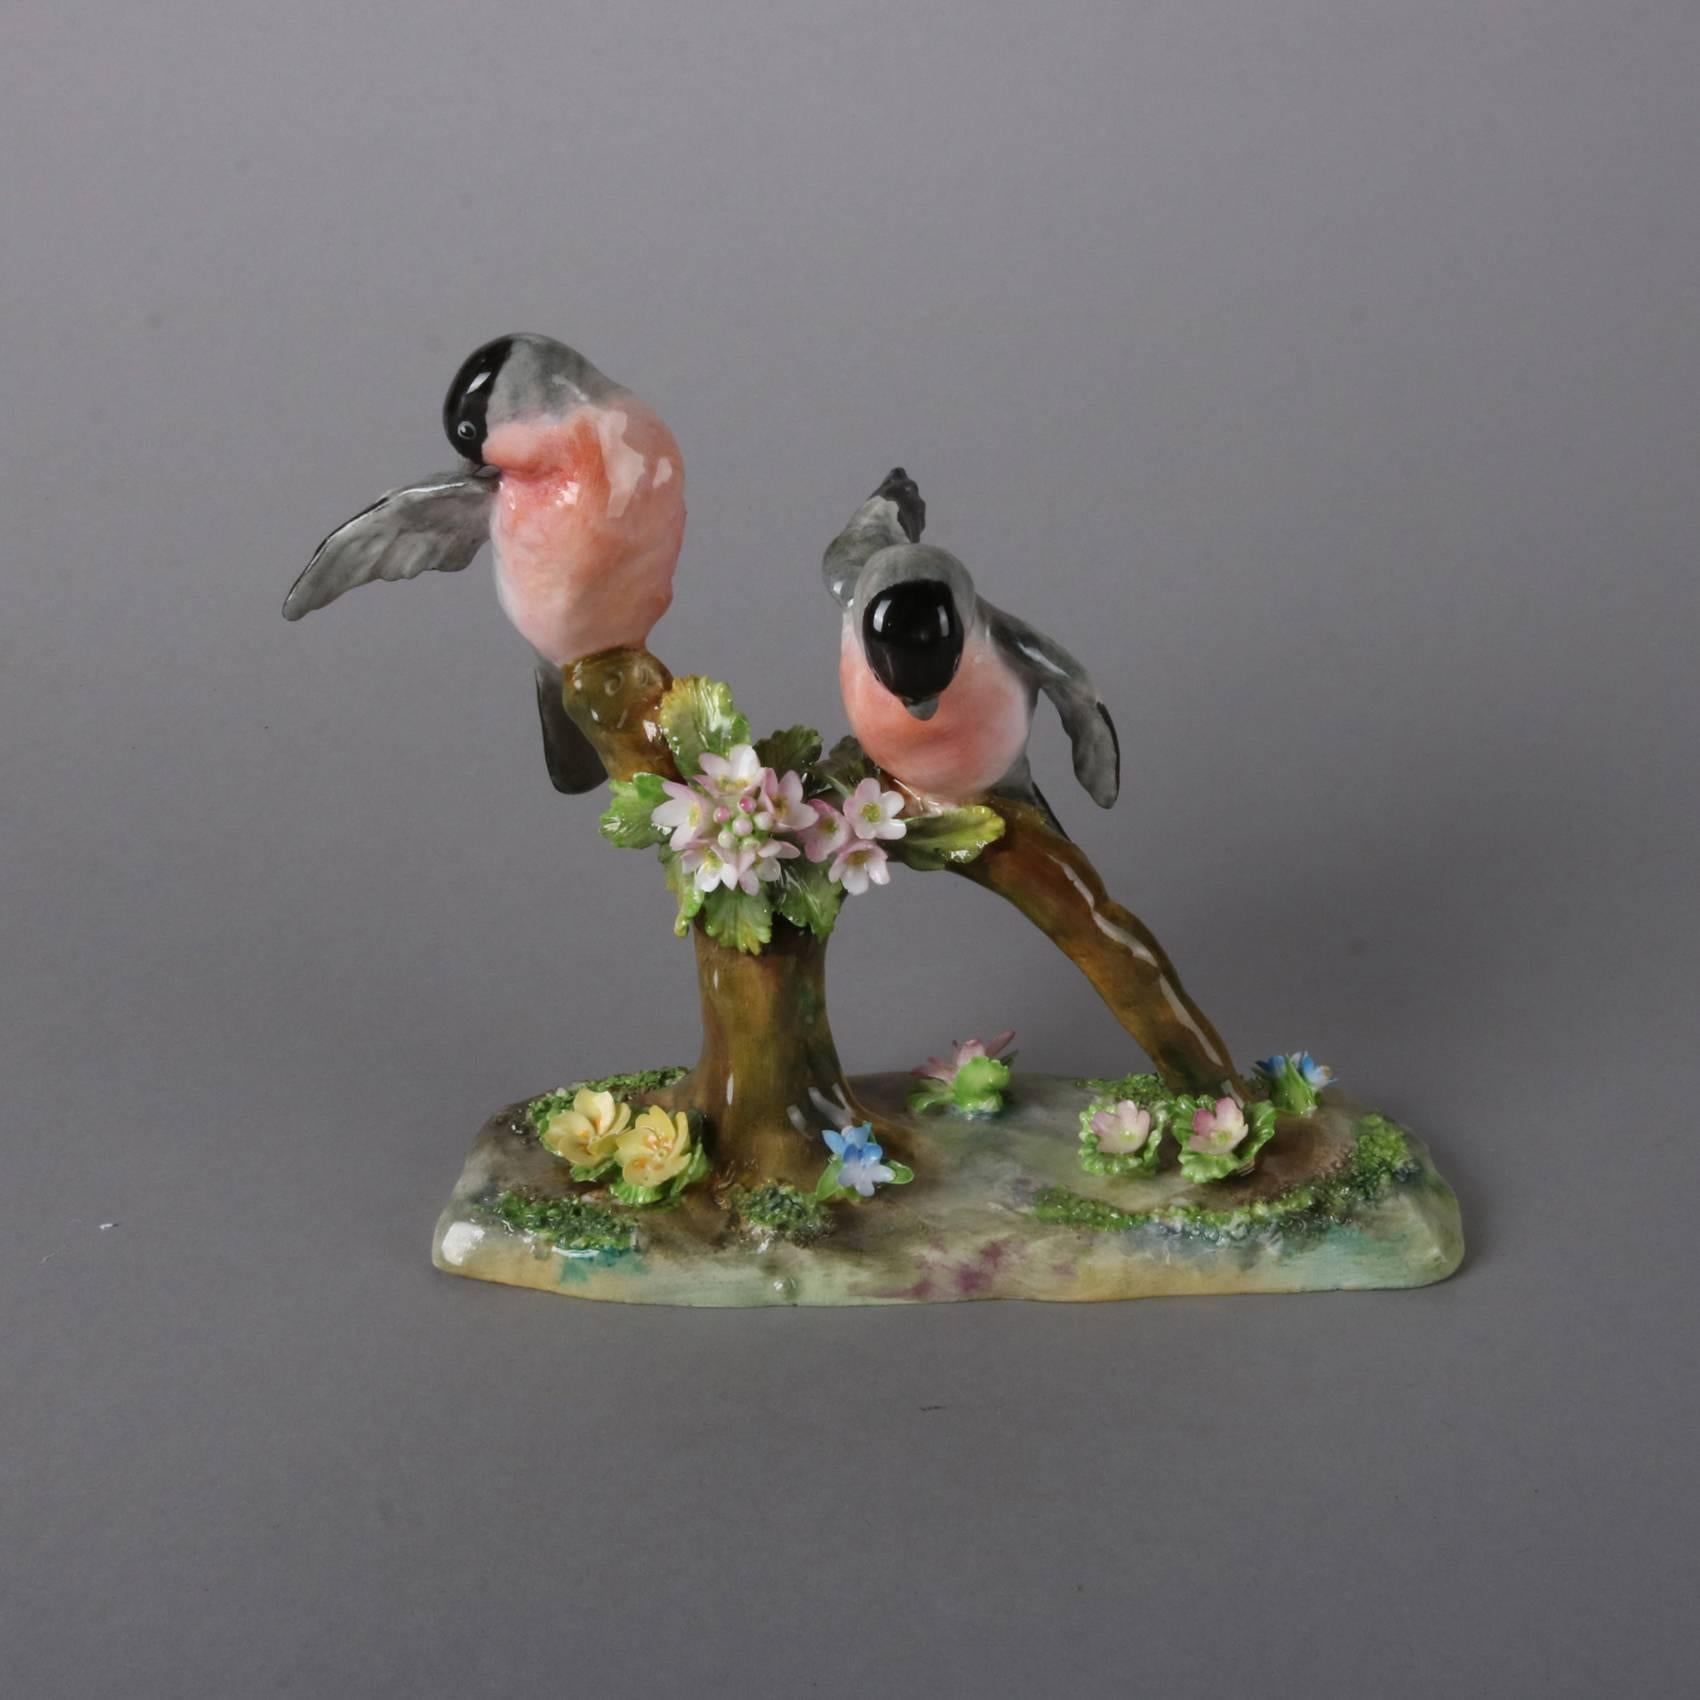 Antique English Staffordshire figurine by J. T. Jones features pair of hand-painted Eurasian Bullfinches preening on branch, signed on base, 20th century

Measures: 5.75" H x 7" W x 3" D.